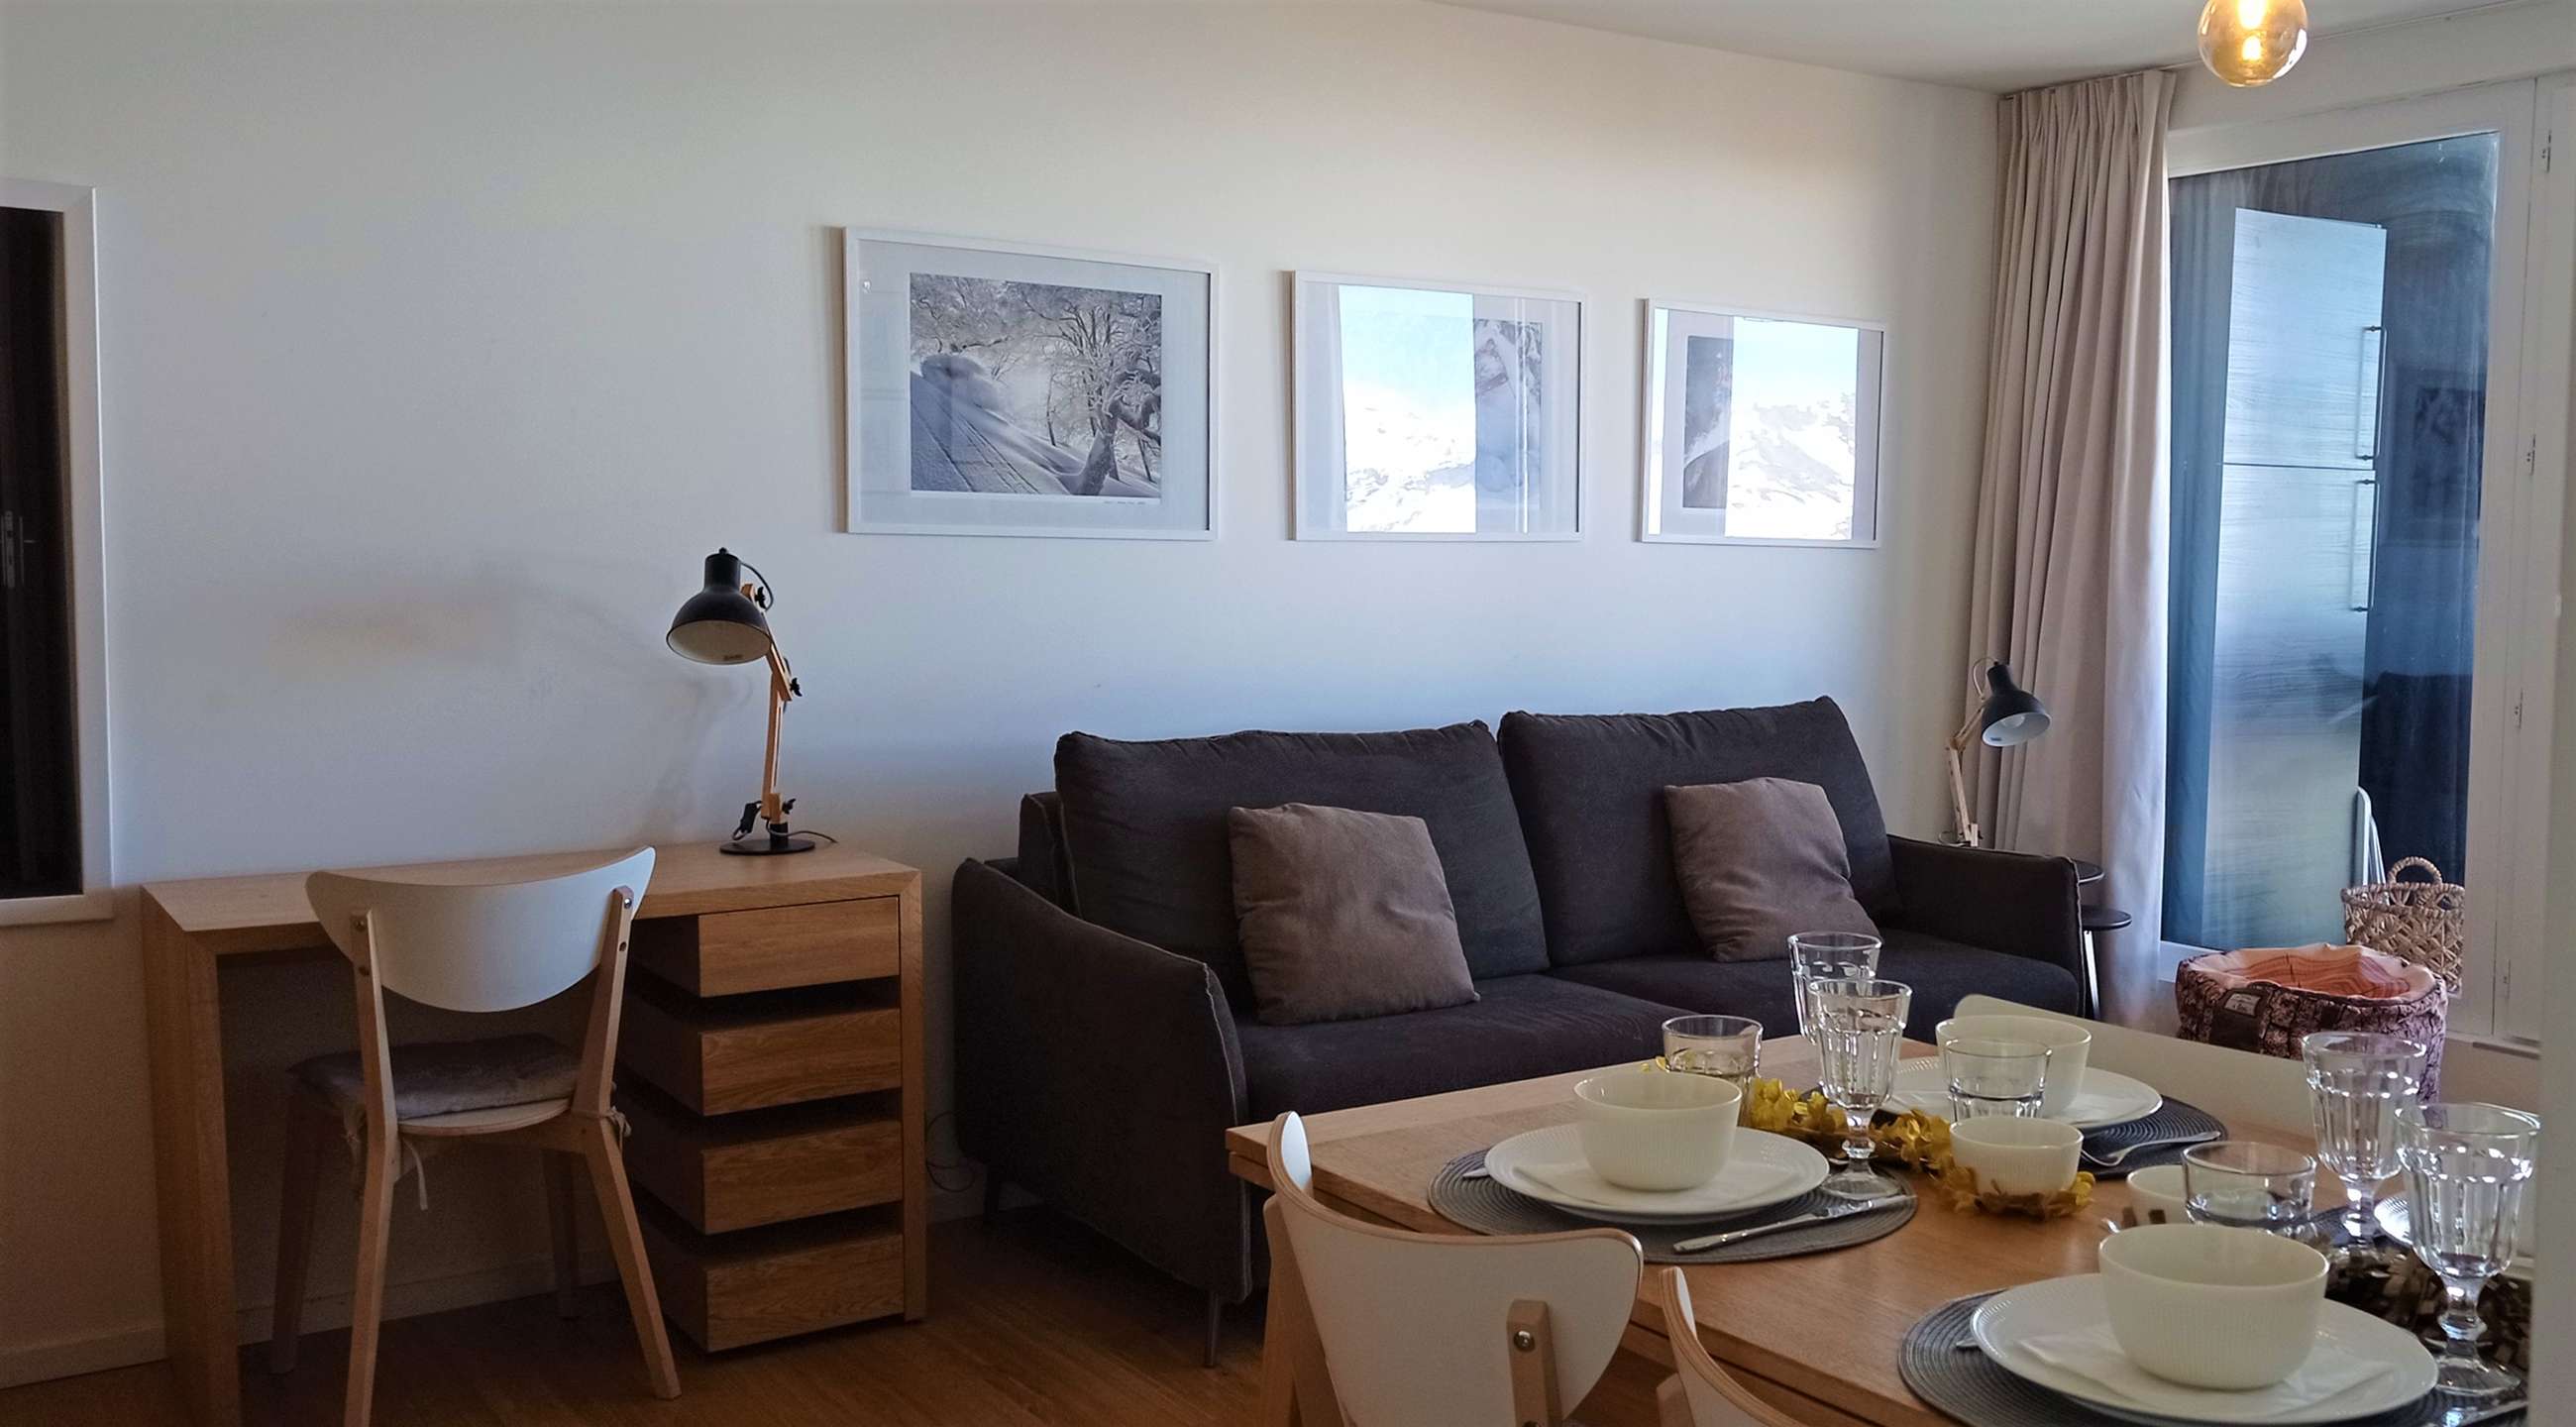 Appartement Les Neves NV 178 - Val Thorens